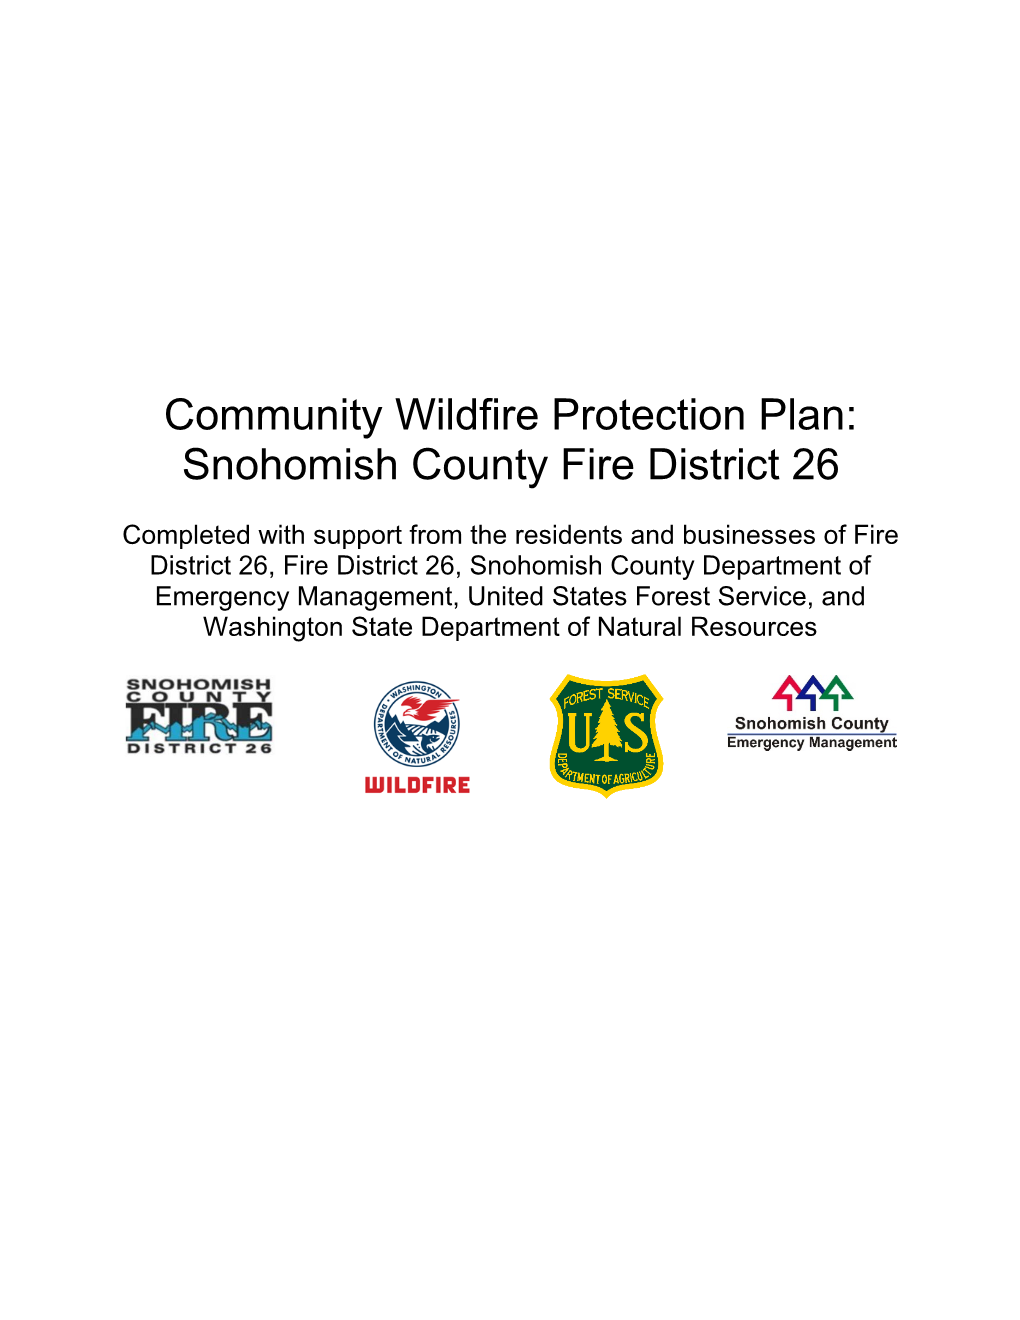 District 26 Community Wildfire Protection Plan Final